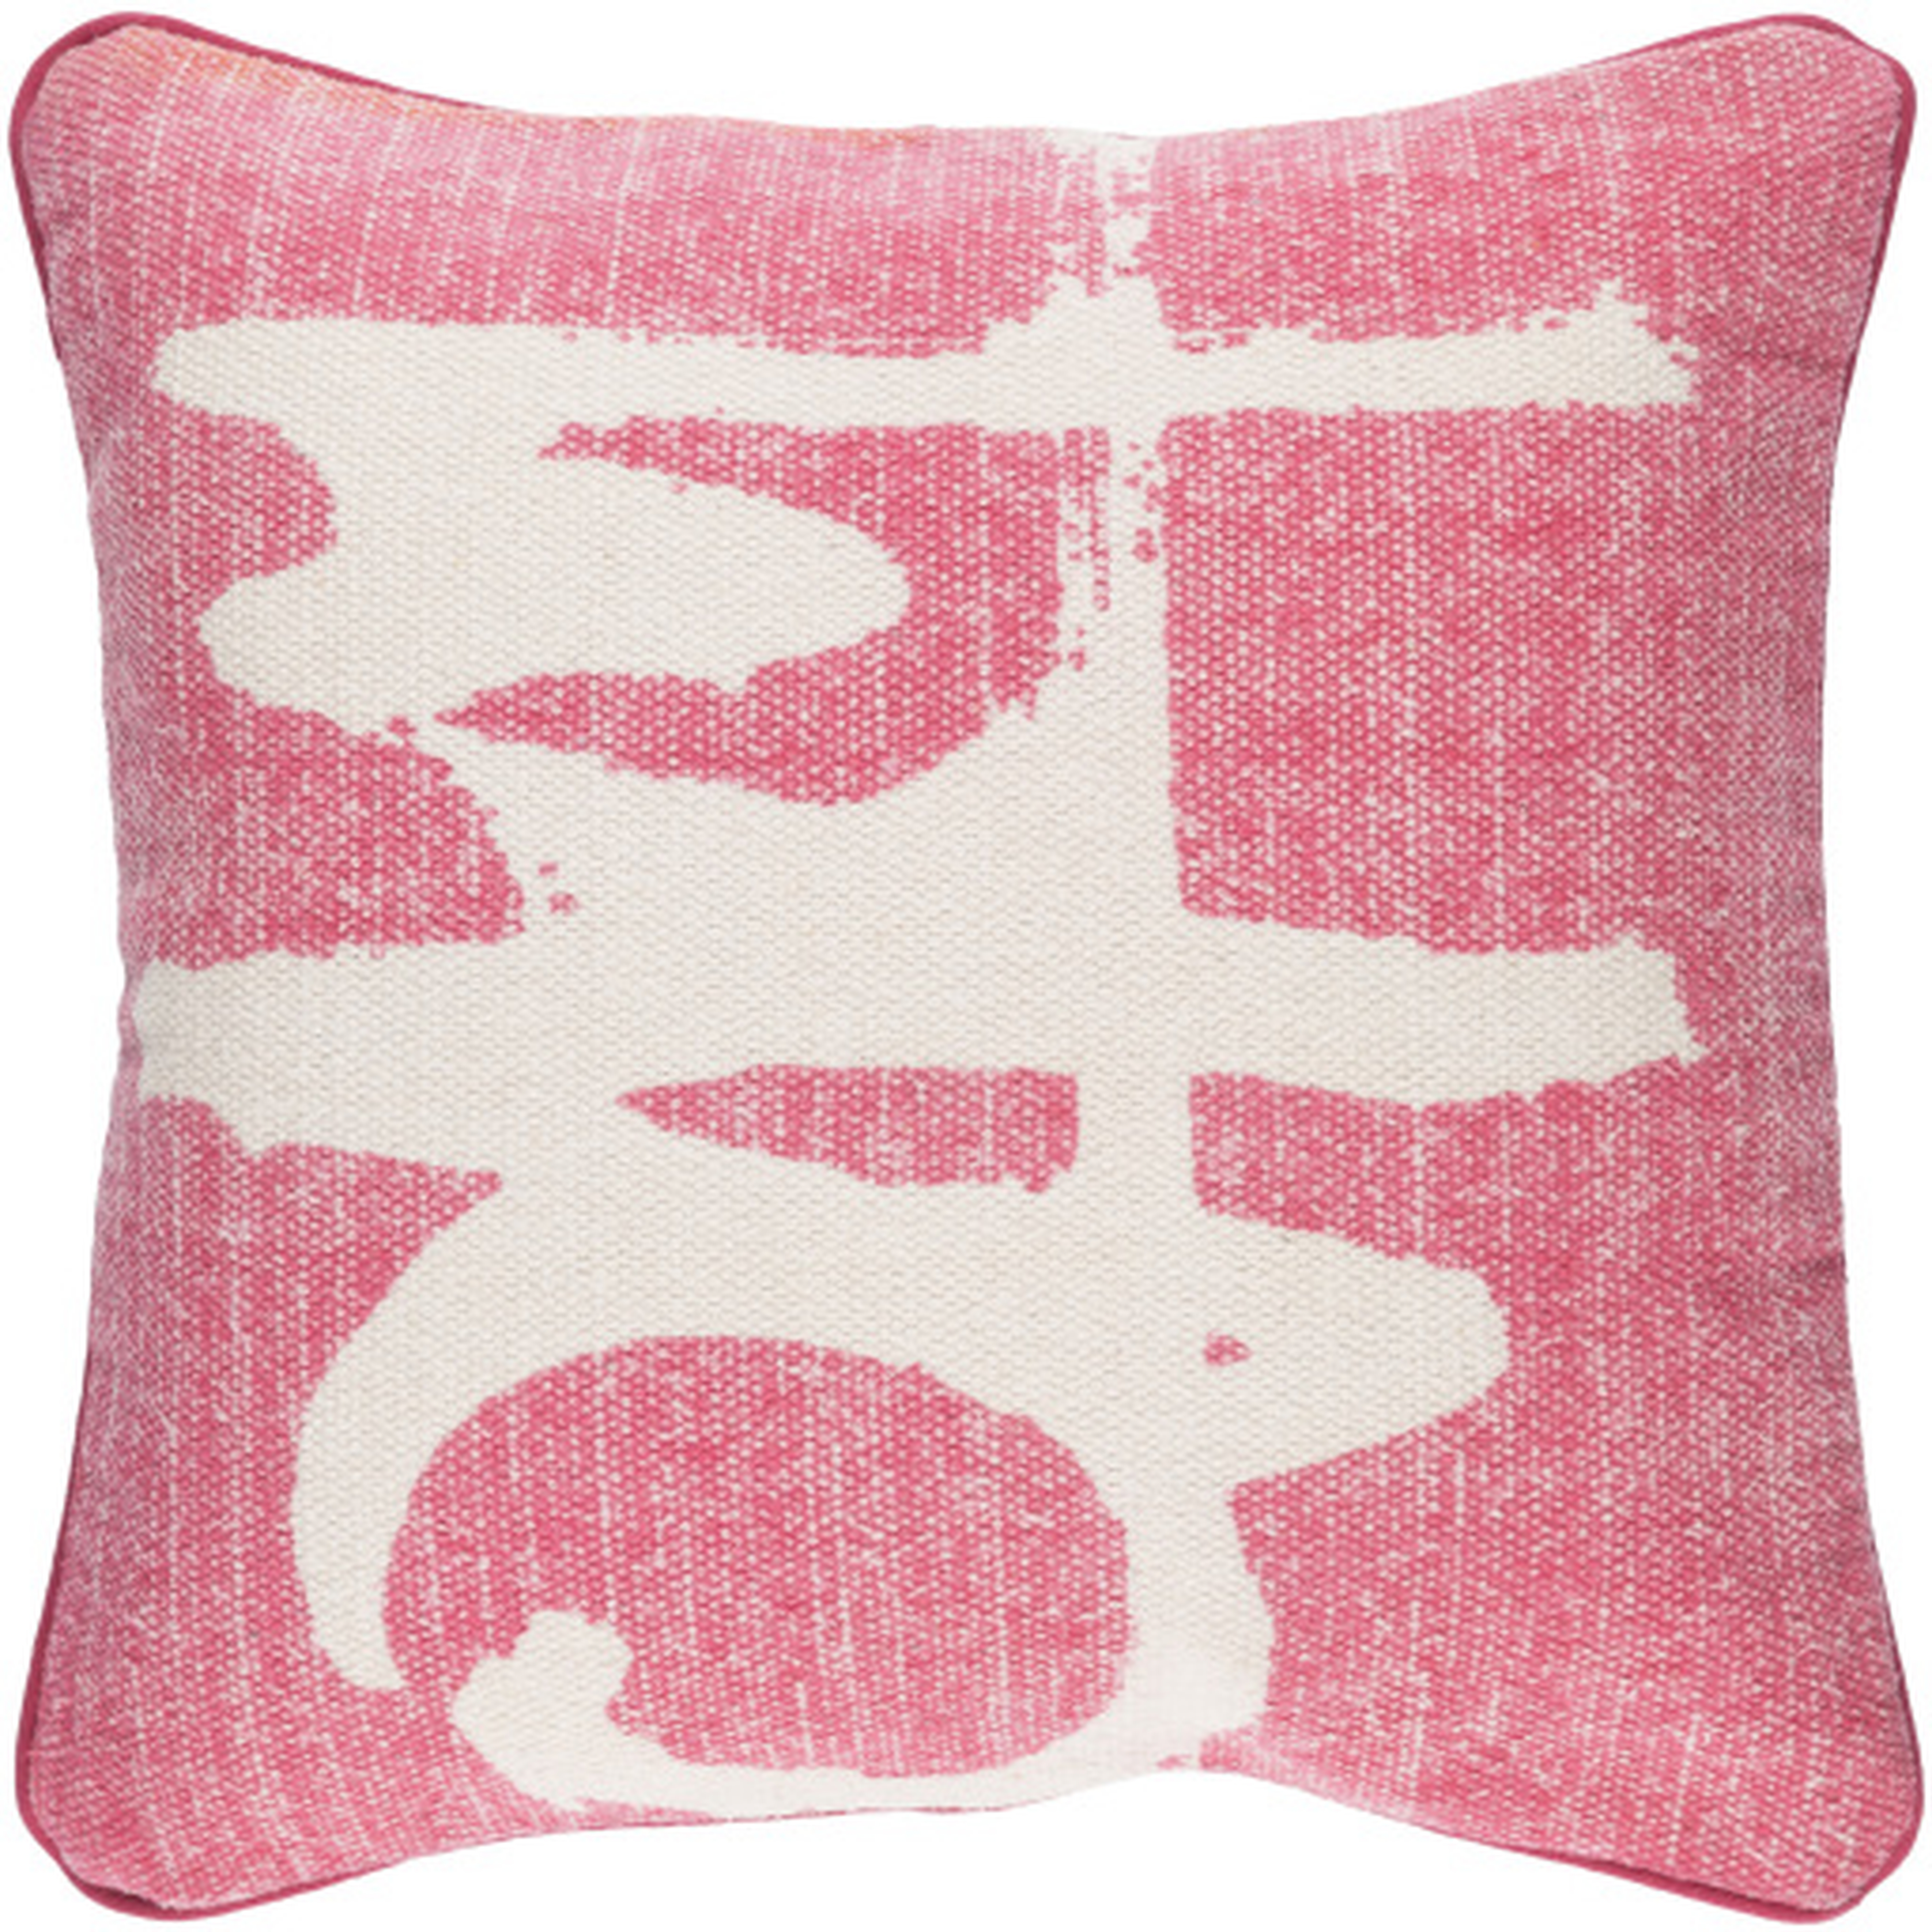 Bristle Throw Pillow, 20" x 20", with down insert - Surya